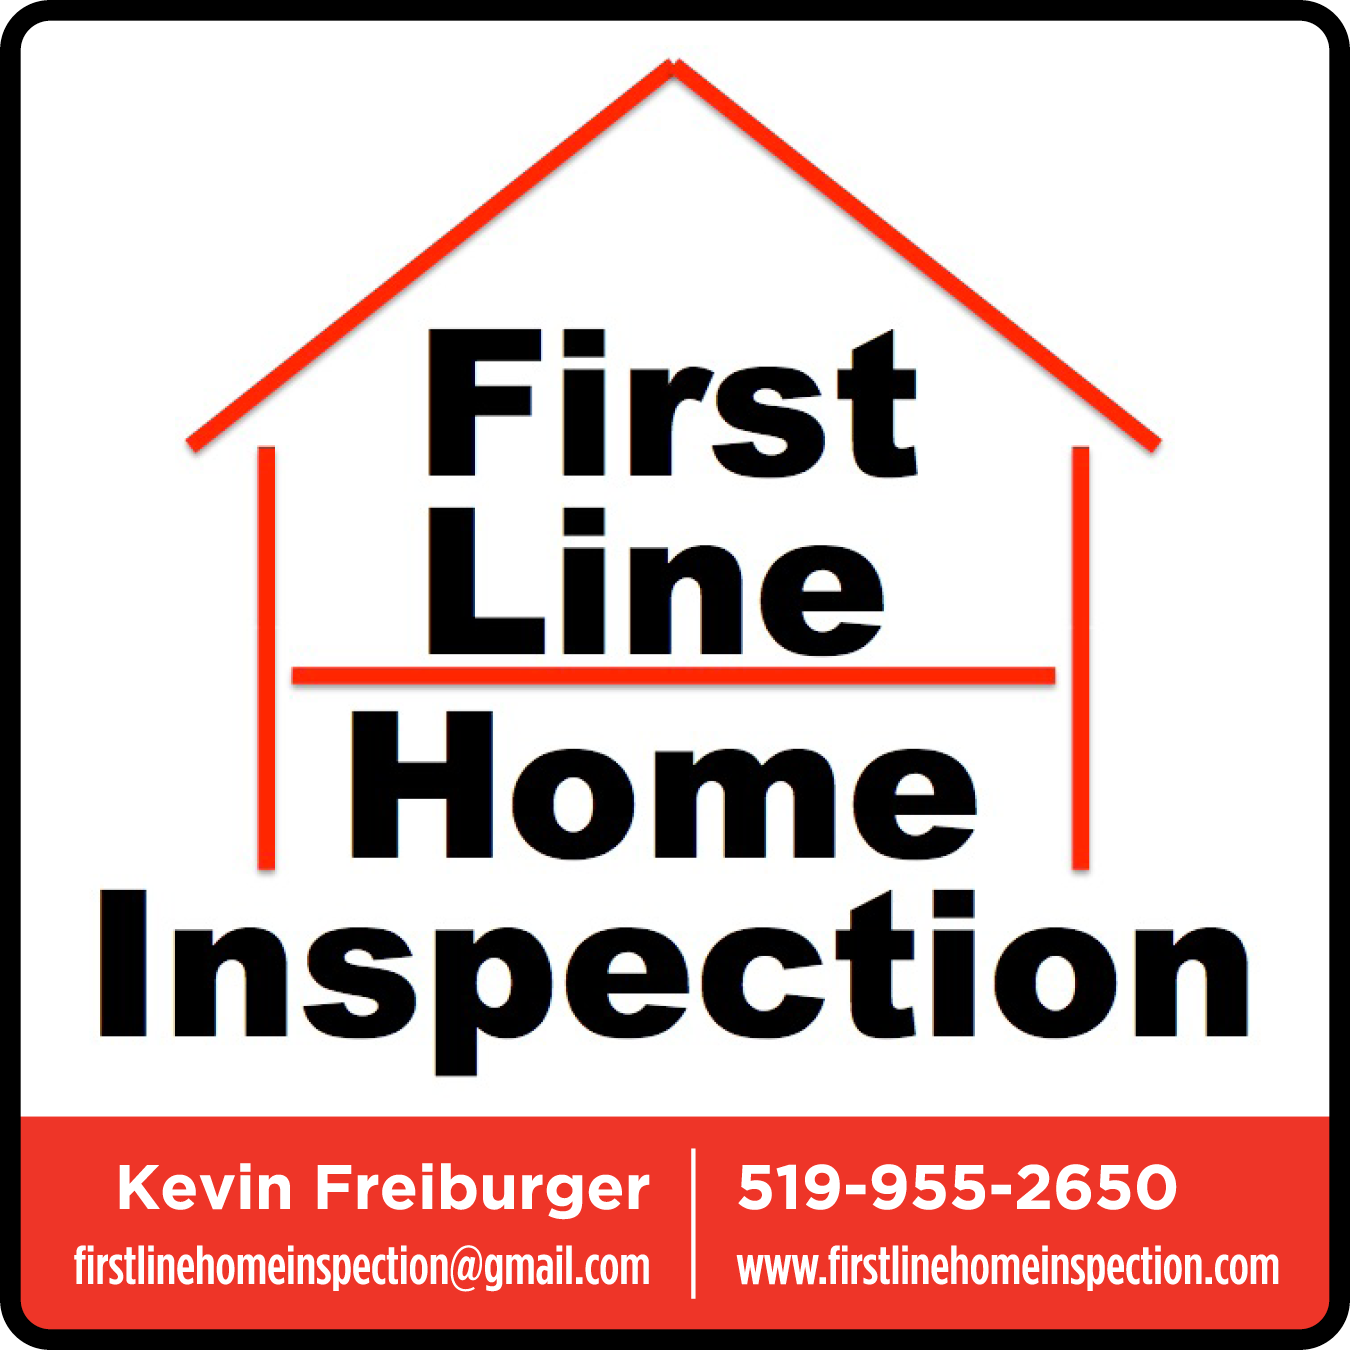 First Line Home Inspection